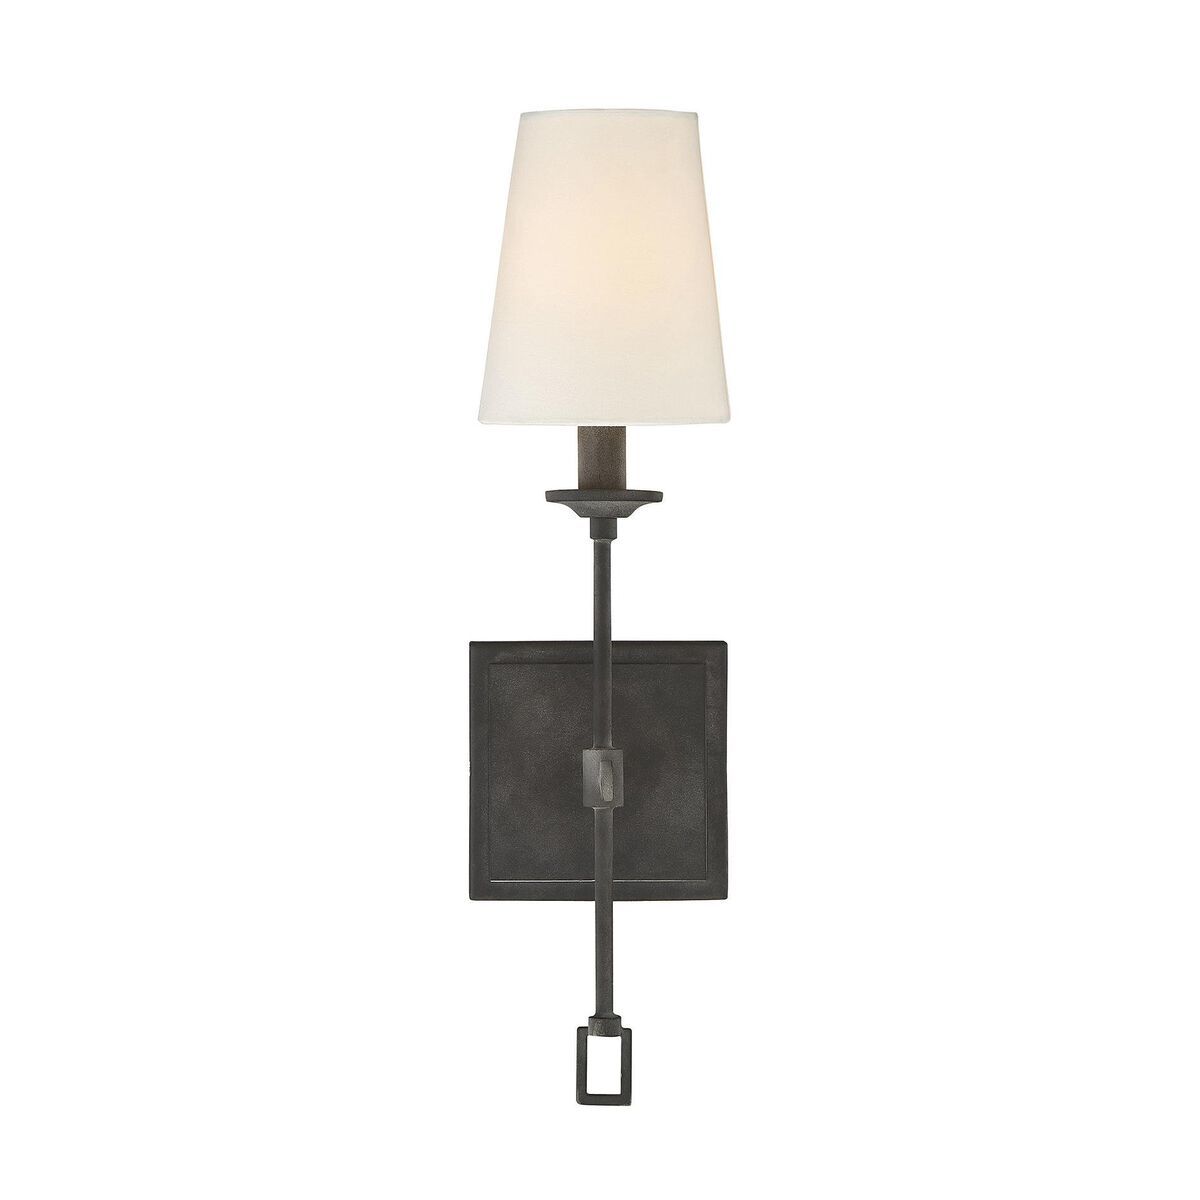 Lorainne 17 Inch Wall Sconce by Savoy House | Capitol Lighting 1800lighting.com